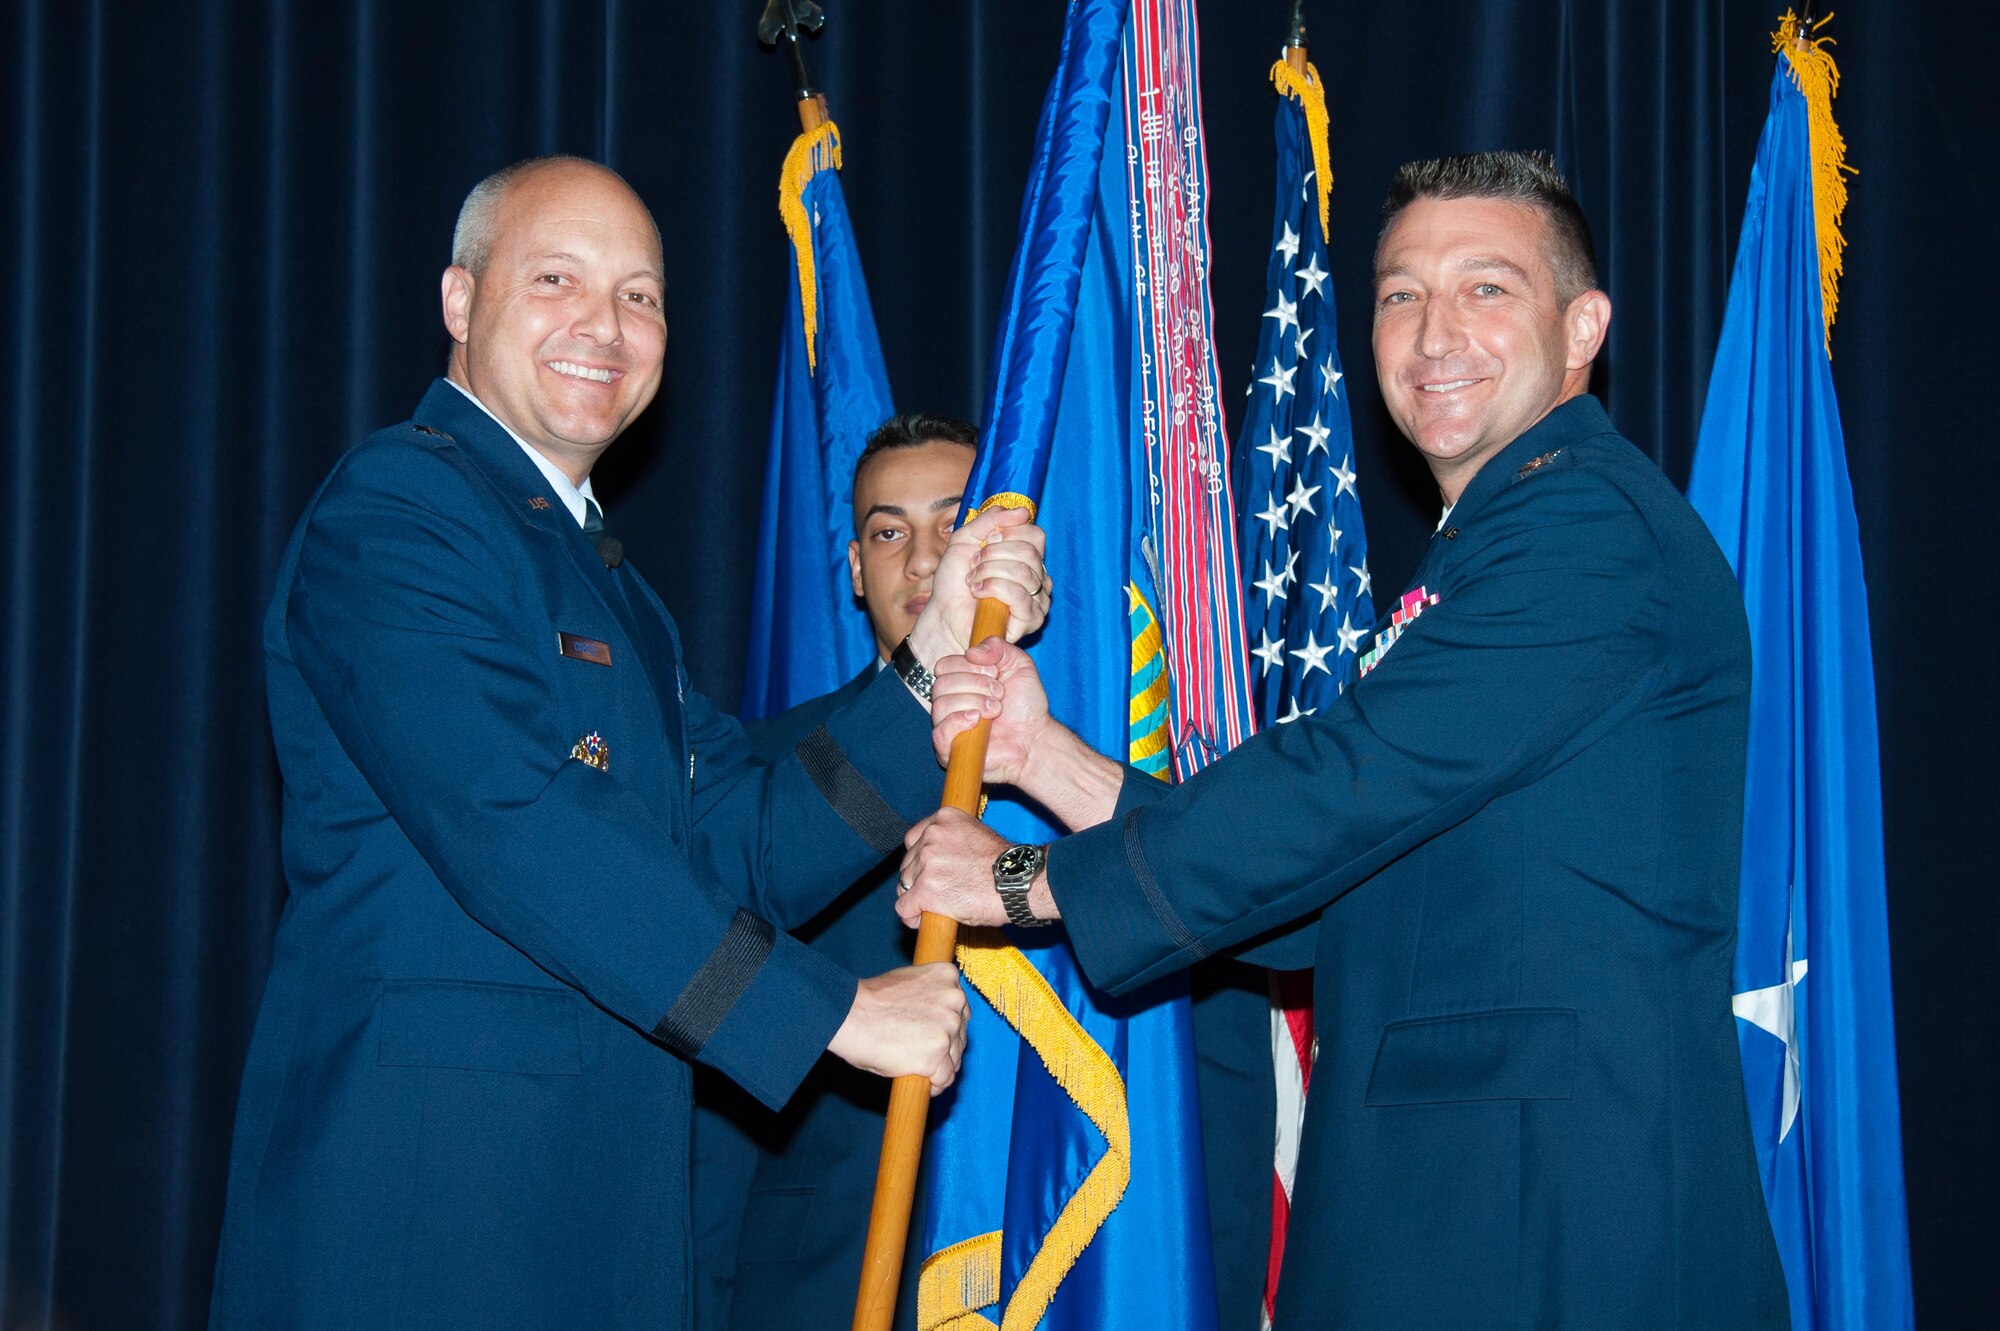 Col. Brian E. Hastings, right, assumes command of Air Command and Staff College from Brig. Gen. Christopher Coffelt, commander of Carl A. Spaatz Center for Officer Education and the Air War College, during a change of command ceremony  Aug. 3, 2015 at Maxwell Air Force Base. Hastings took command of the college from Col. William DeMarco. (U.S. Air Force photo by Melanie Rodgers Cox/Released)